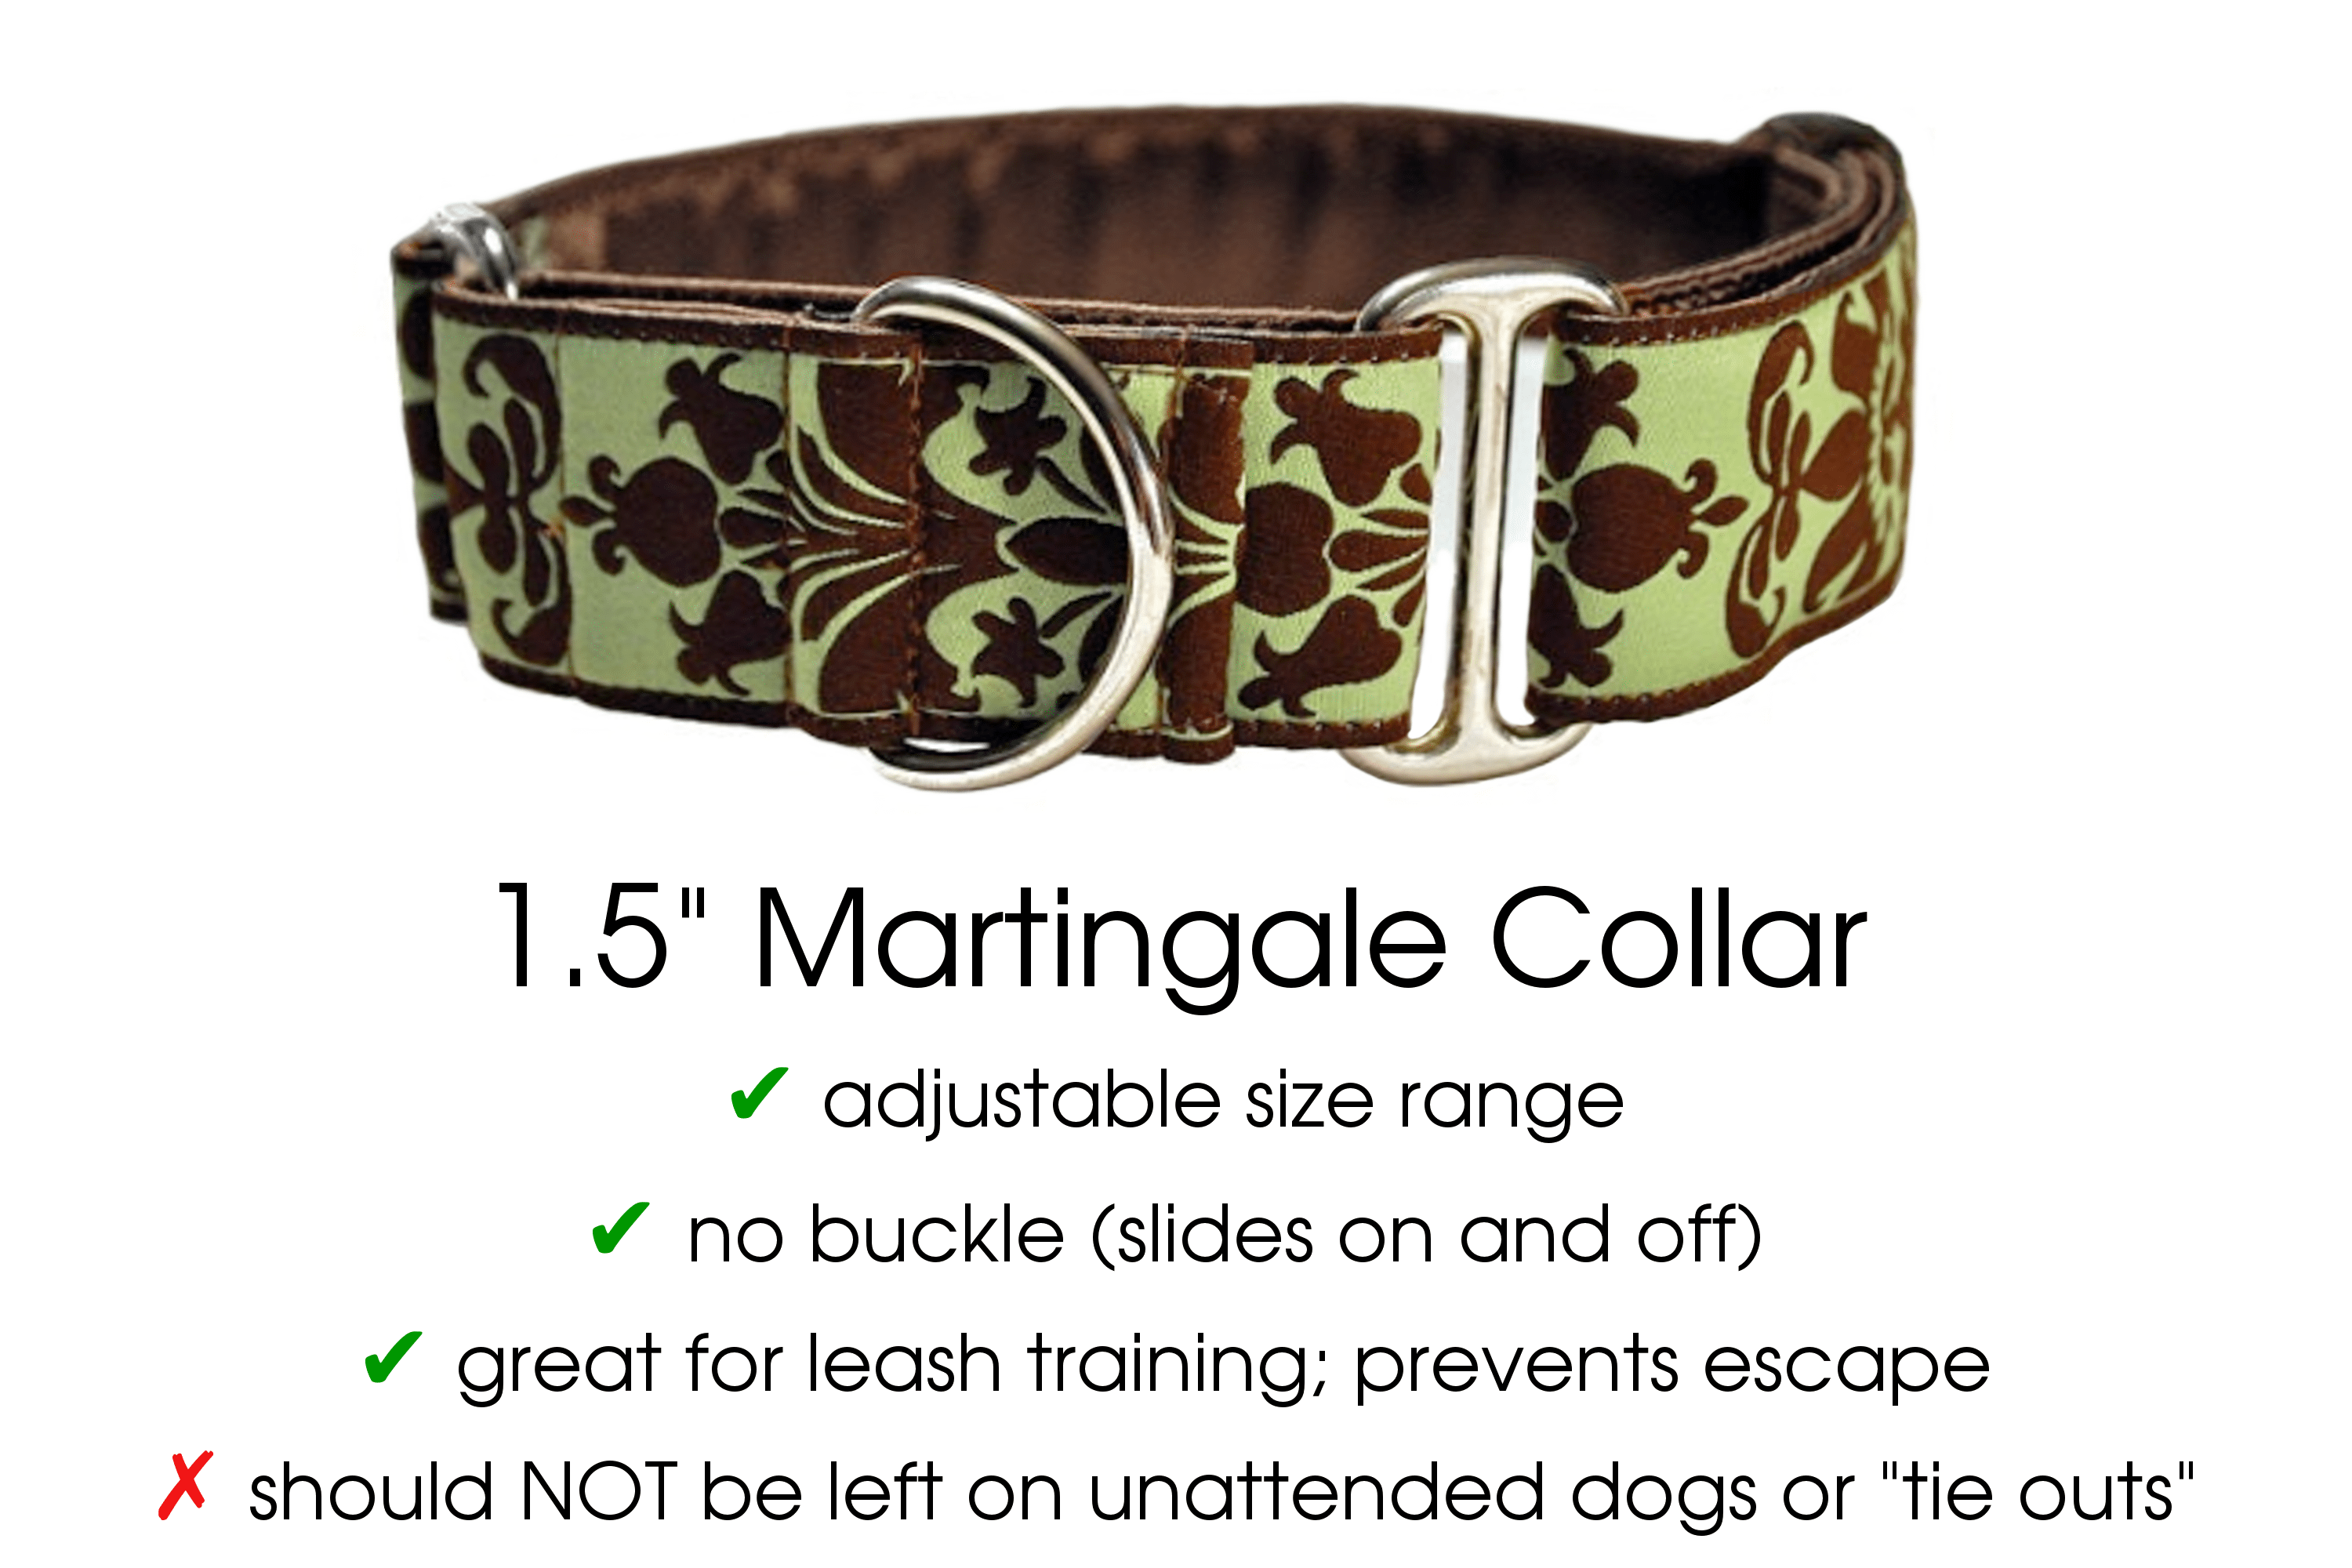 Lyons Damask in Green and Chocolate - Martingale Dog Collar or Buckle Dog Collar - 1.5" Width - The Hound Haberdashery